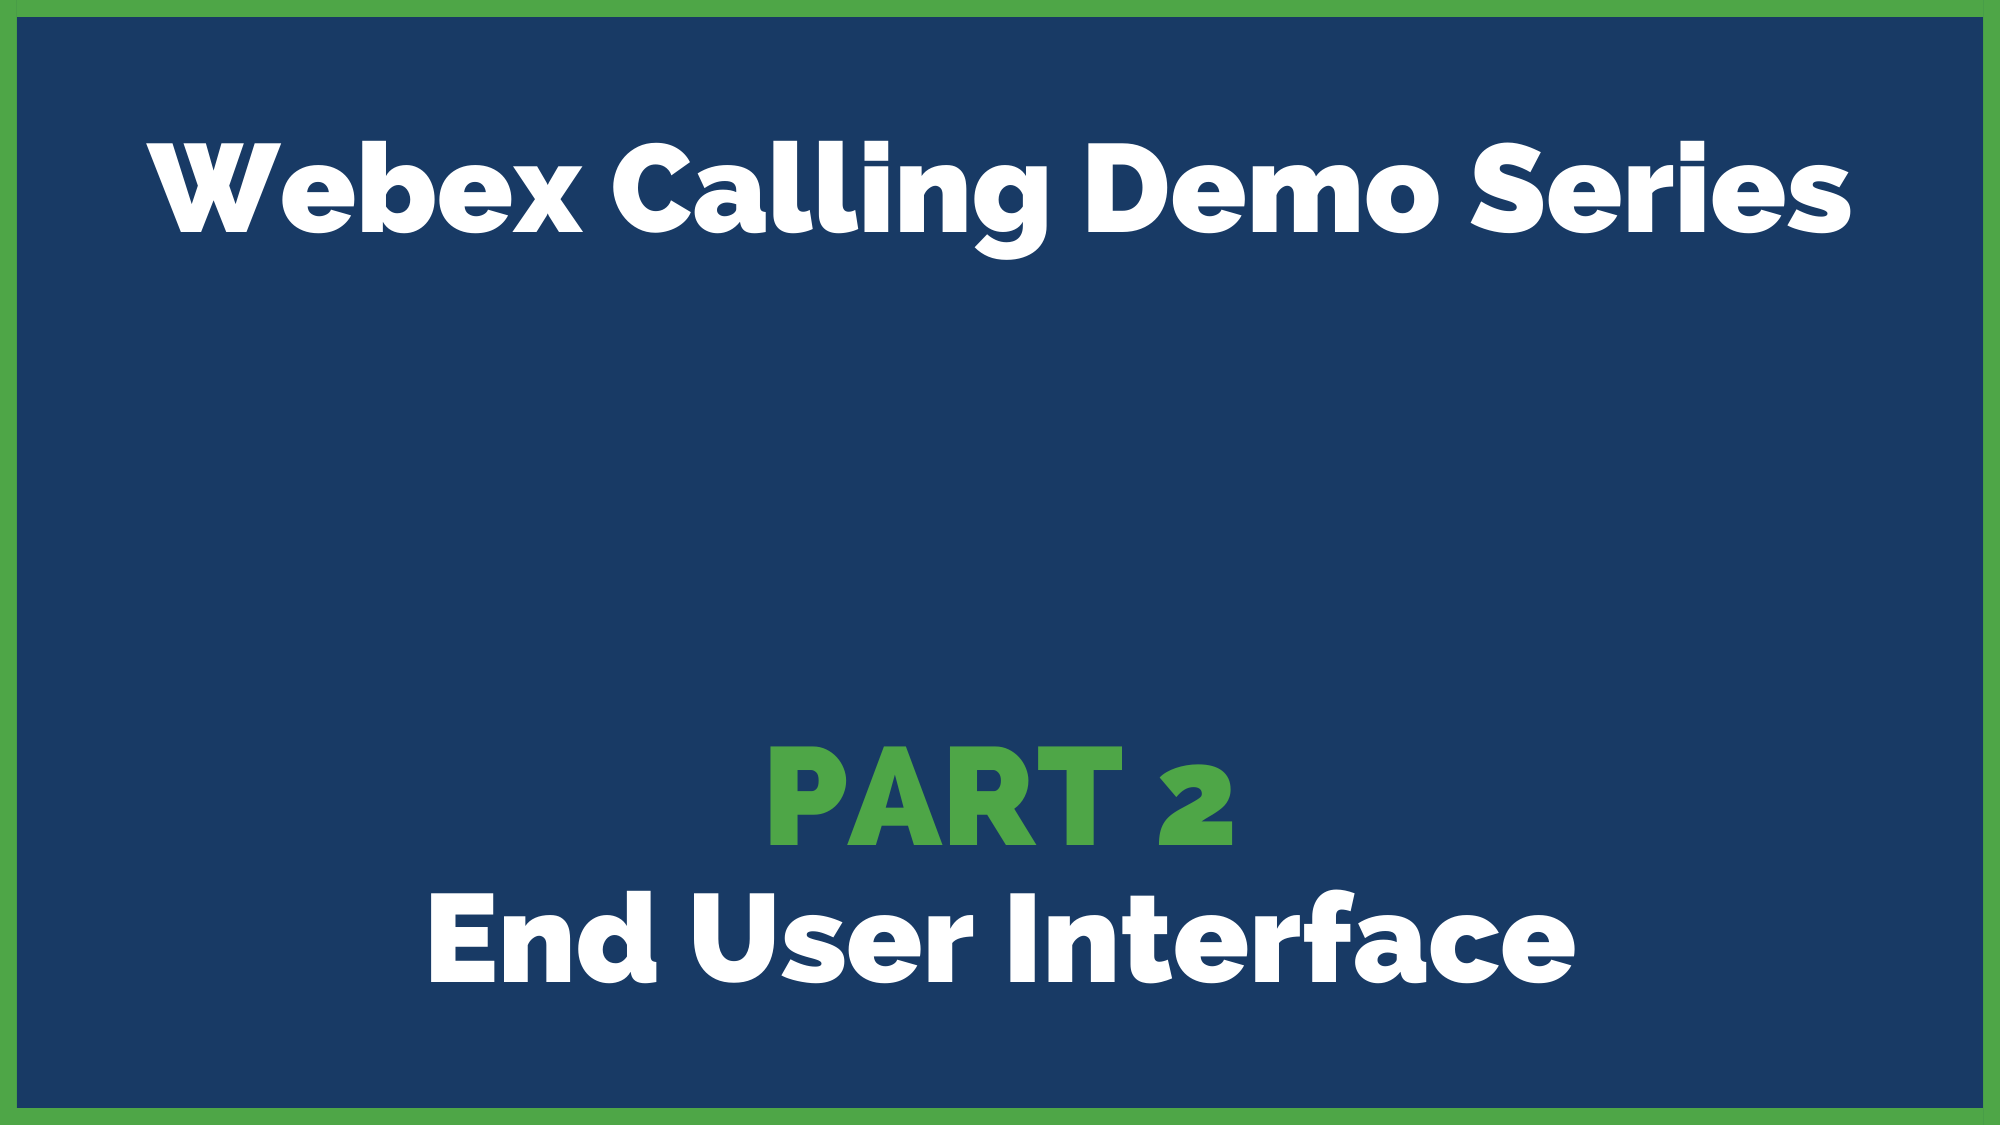 2022 Webex Calling Demo Series Part 2: End User Interface